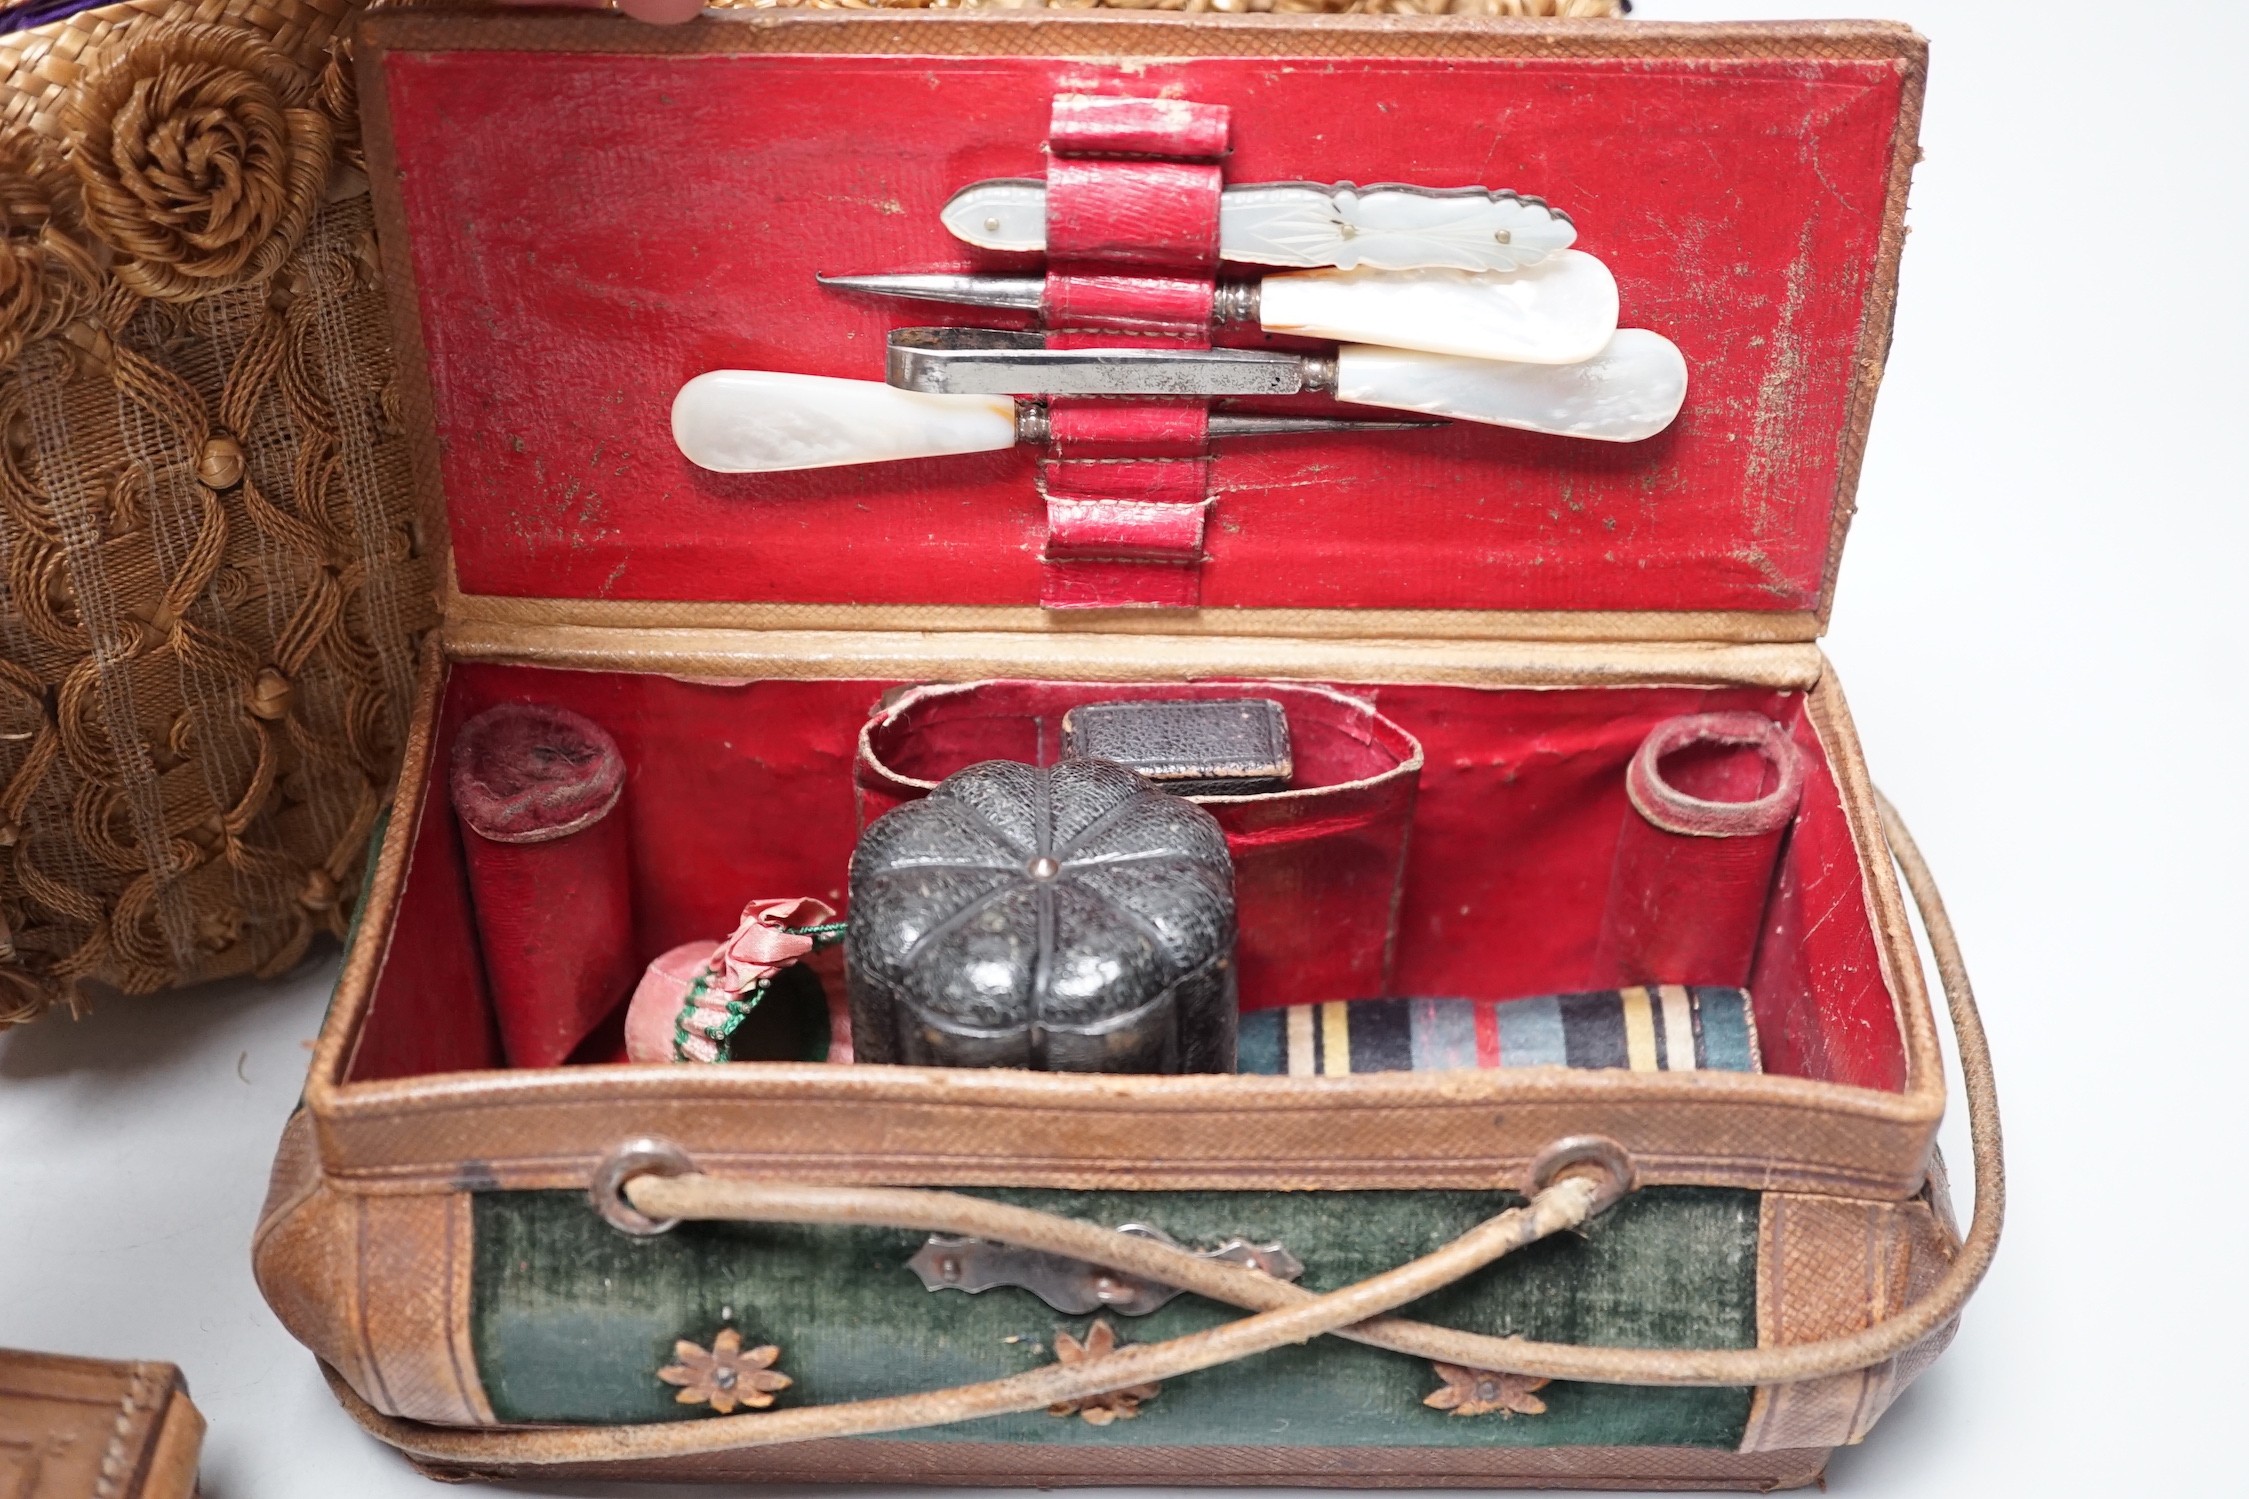 An unusual Edwardian straw and braided basket/bag, a French late 19th century basket with makers mark on metal mounts Berthelon, Macon, a small leather and velvet vanity case and contents and leather stationary case